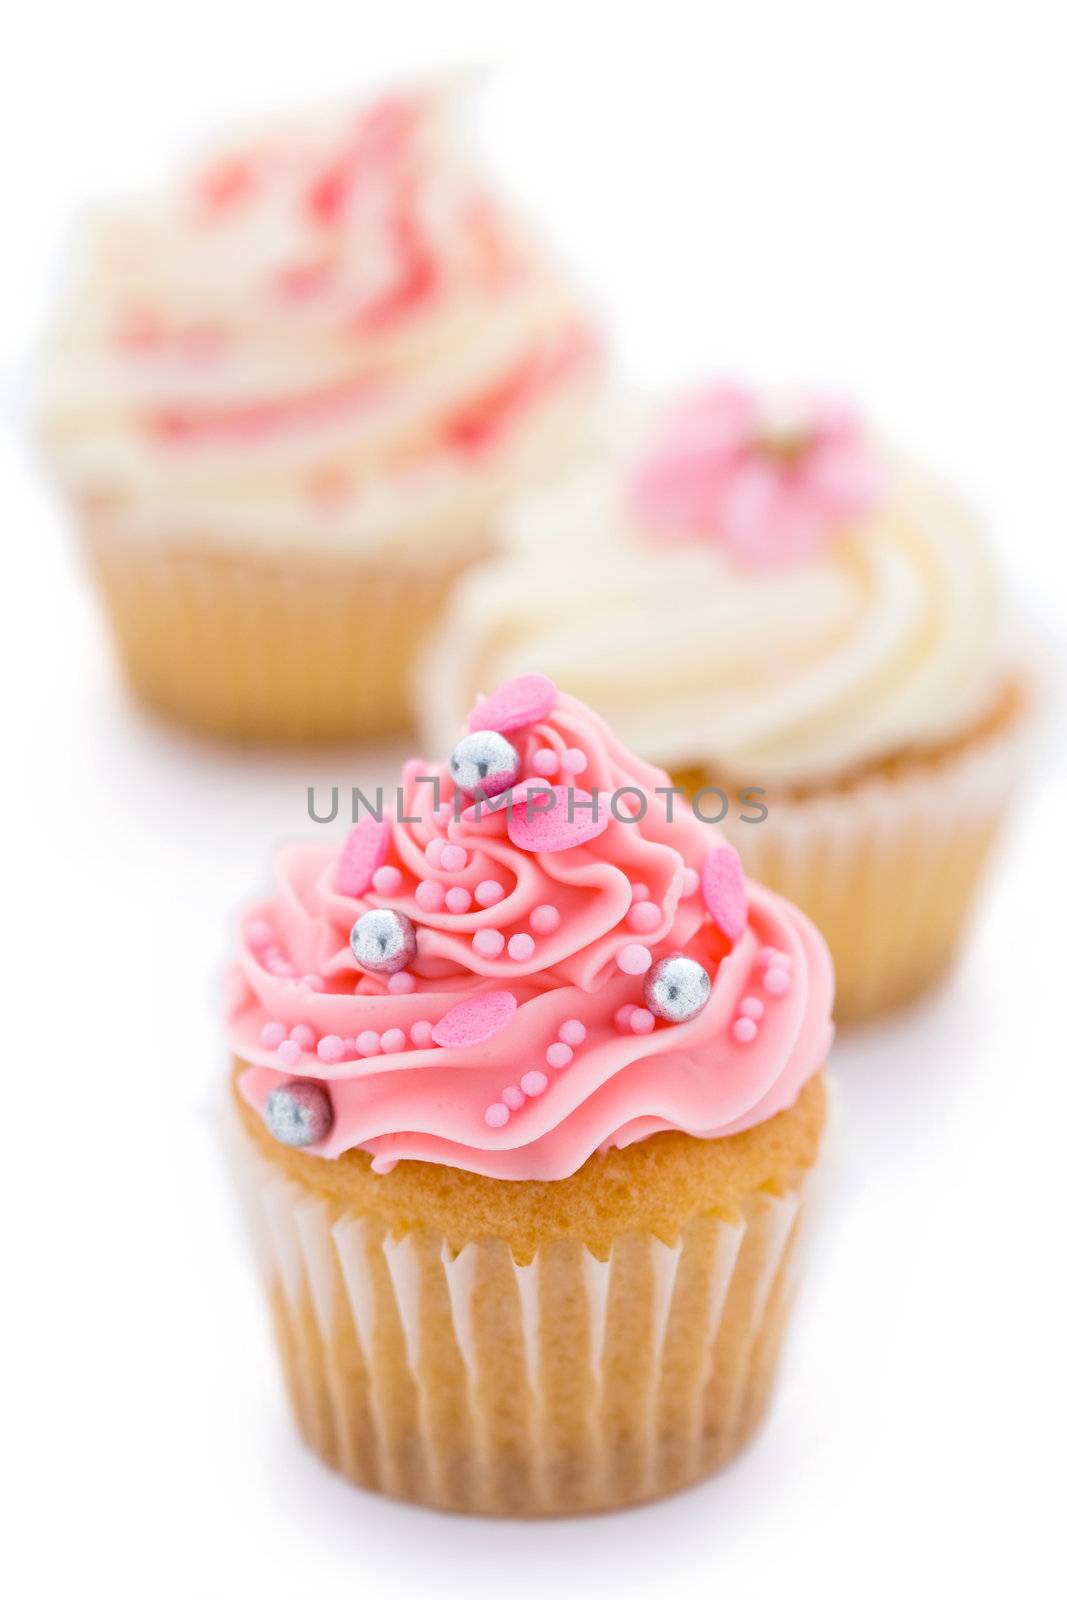 Pink and white cupcakes by RuthBlack